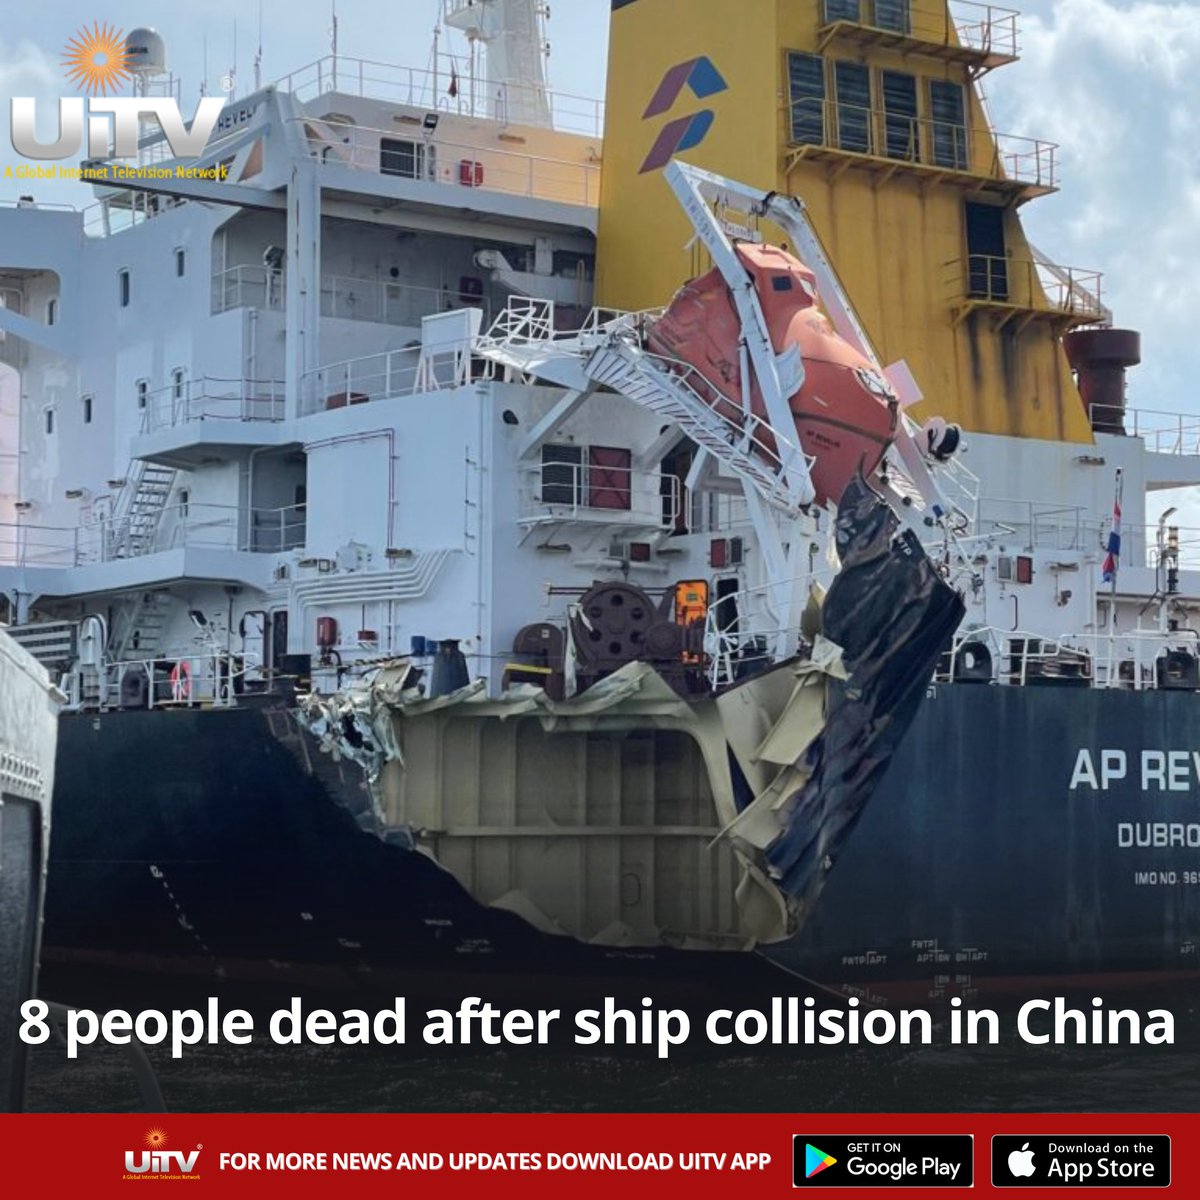 Tragic news out of China today as reports emerge of a ship collision resulting in the loss of 8 lives. Our hearts go out to the families and loved ones of those affected by this devastating incident. #China #ShipCollision #Condolence